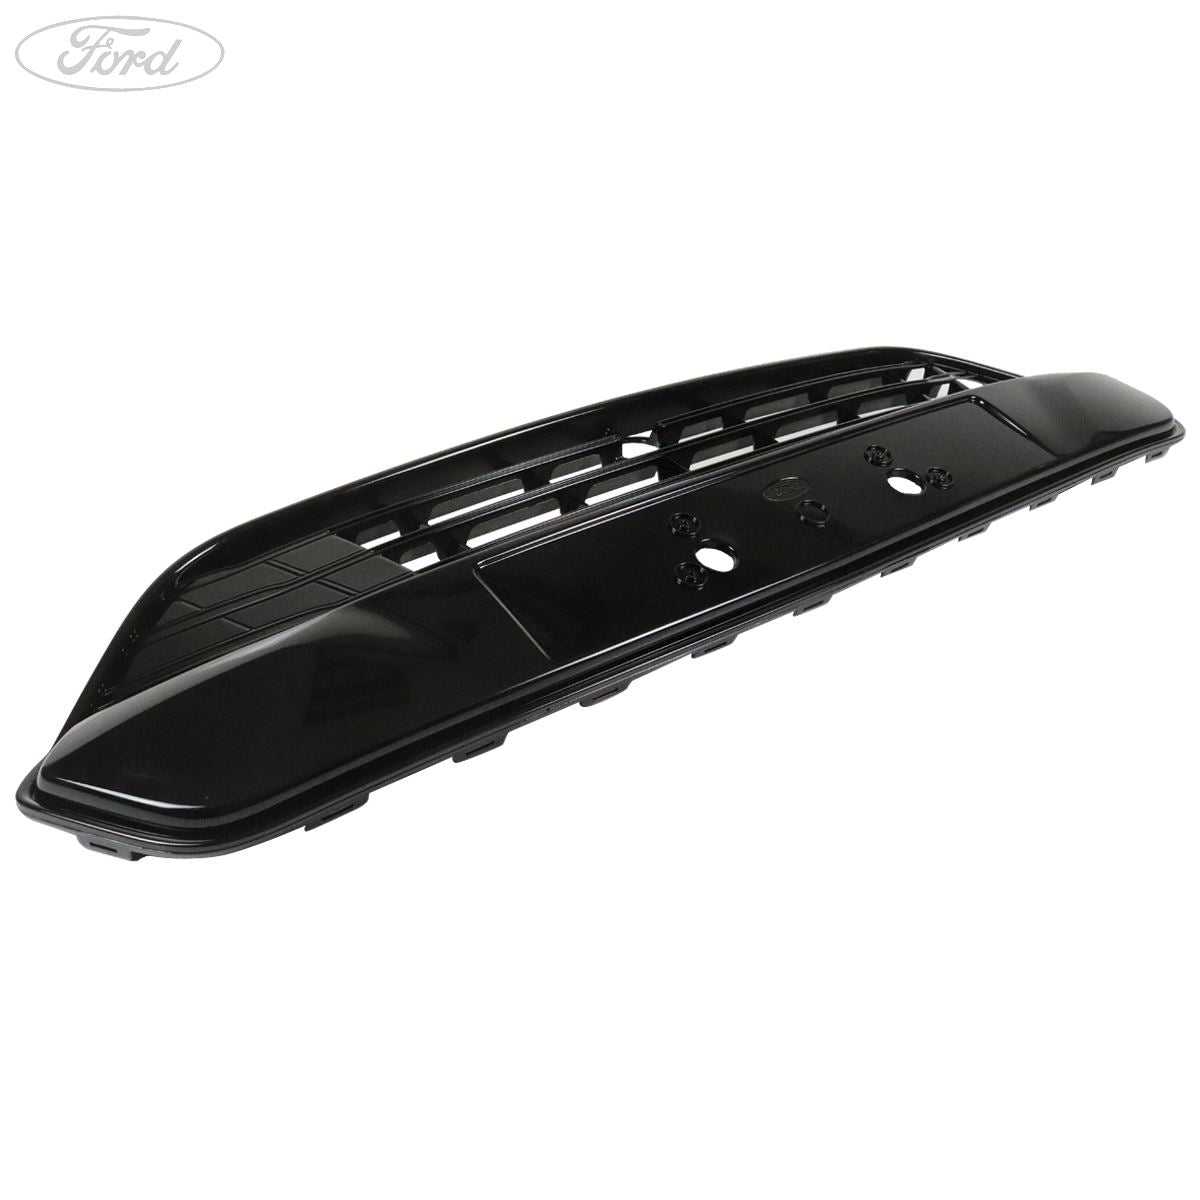 Ford, TRANSIT TOURNEO CUSTOM FRONT RADIATOR GRILLE COVER BLACK